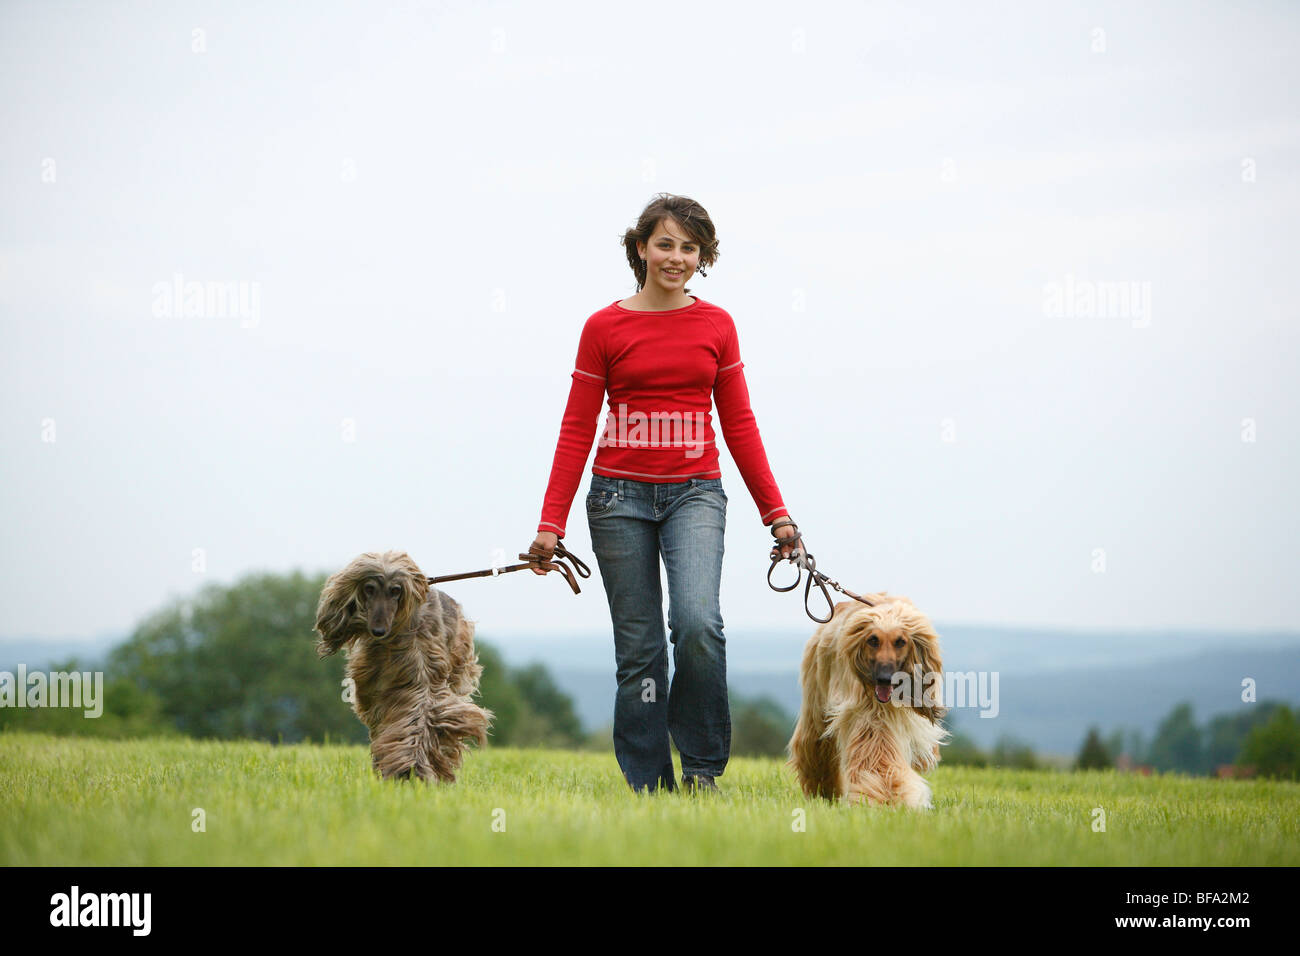 Afghanistan Hound, Afghan Hound (Canis lupus f. familiaris), girl with their two leashed dogs in a meadow, Germany Stock Photo